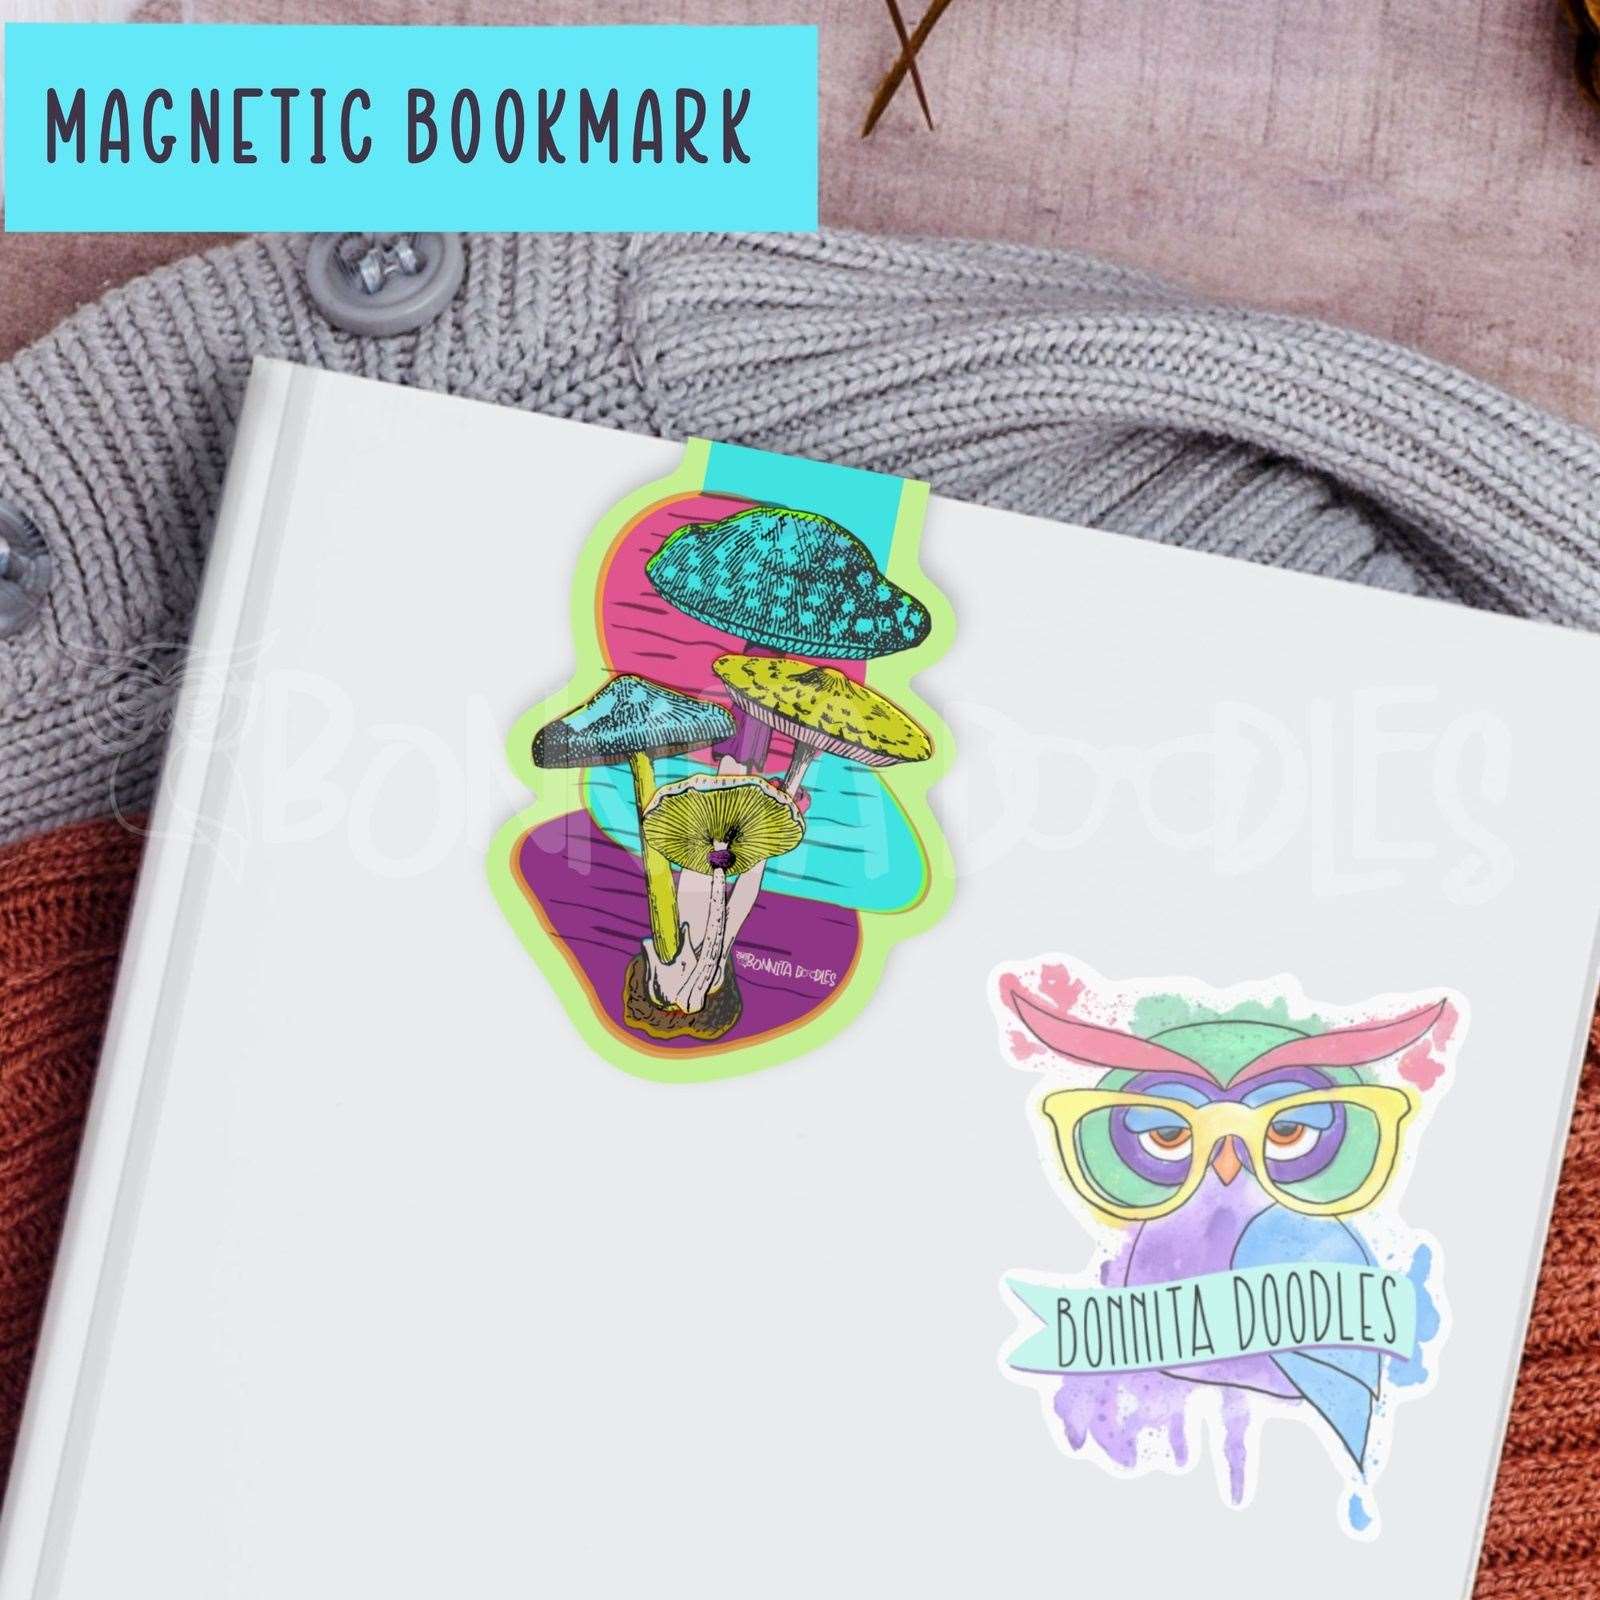 Mushrooms vintage magnetic bookmark - the perfect gift